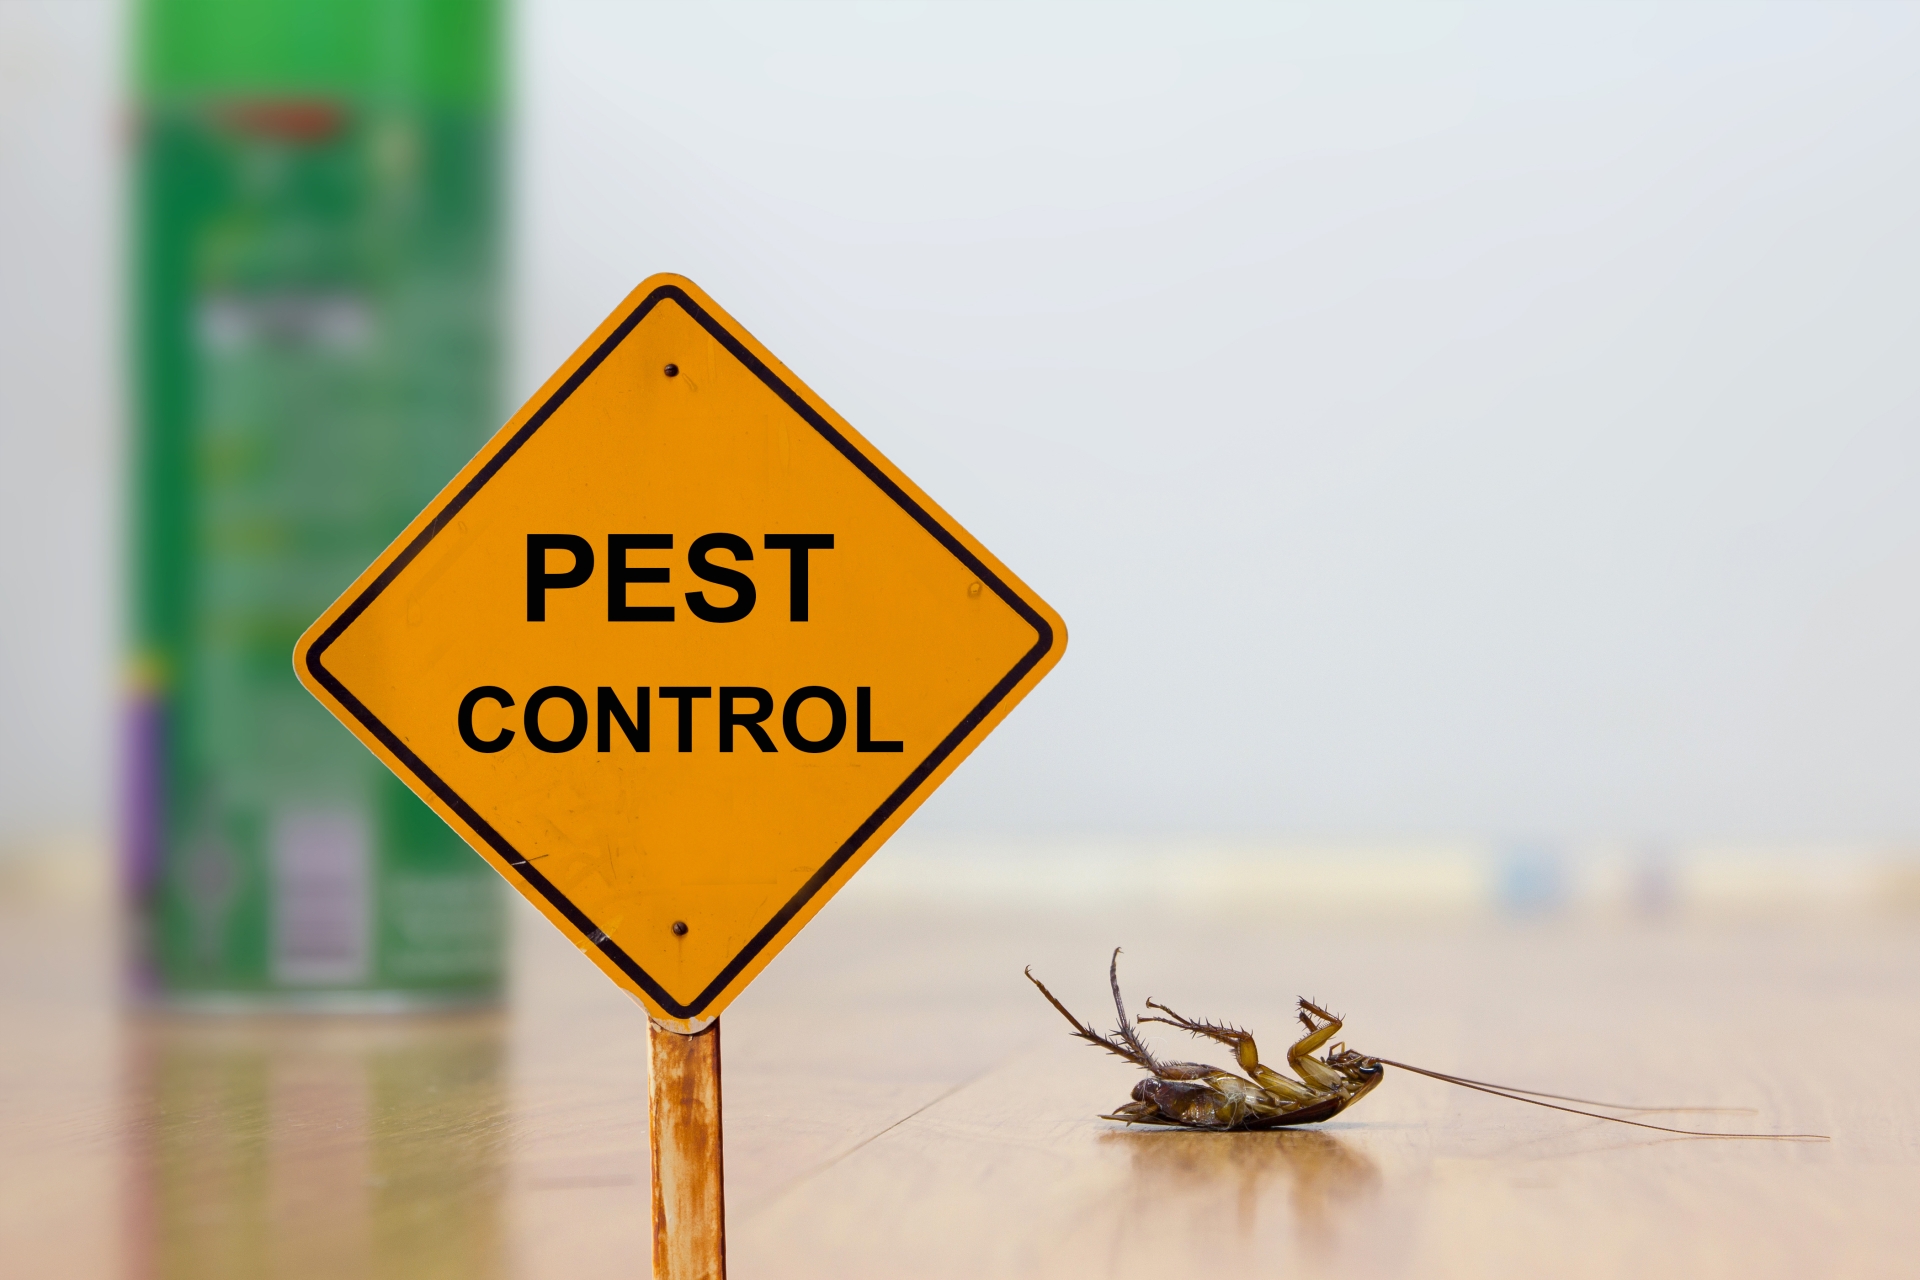 24 Hour Pest Control, Pest Control in Friern Barnet, New Southgate, N11. Call Now 020 8166 9746